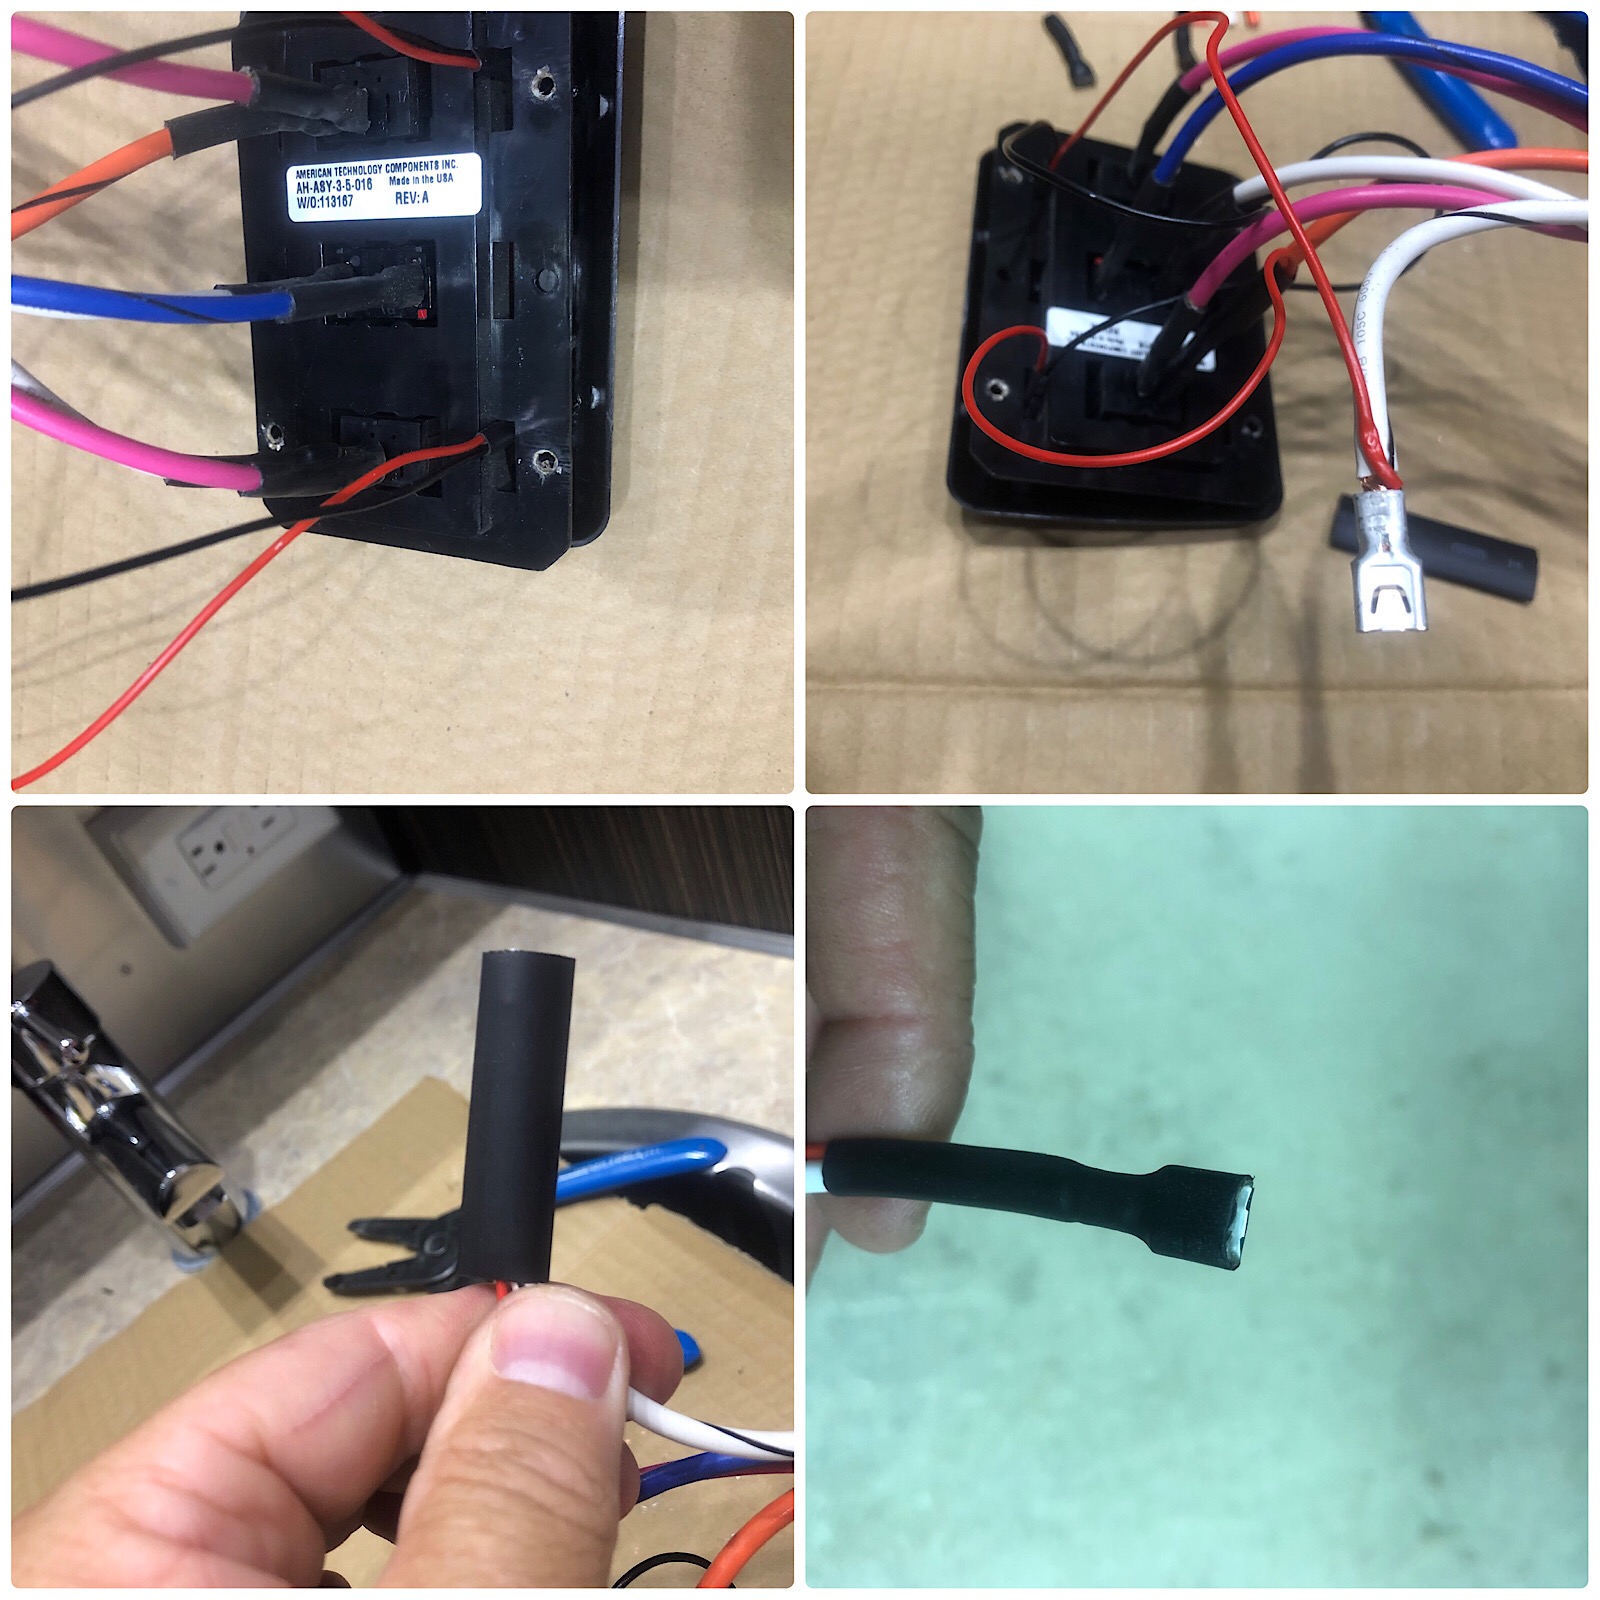 connecting the LED to power